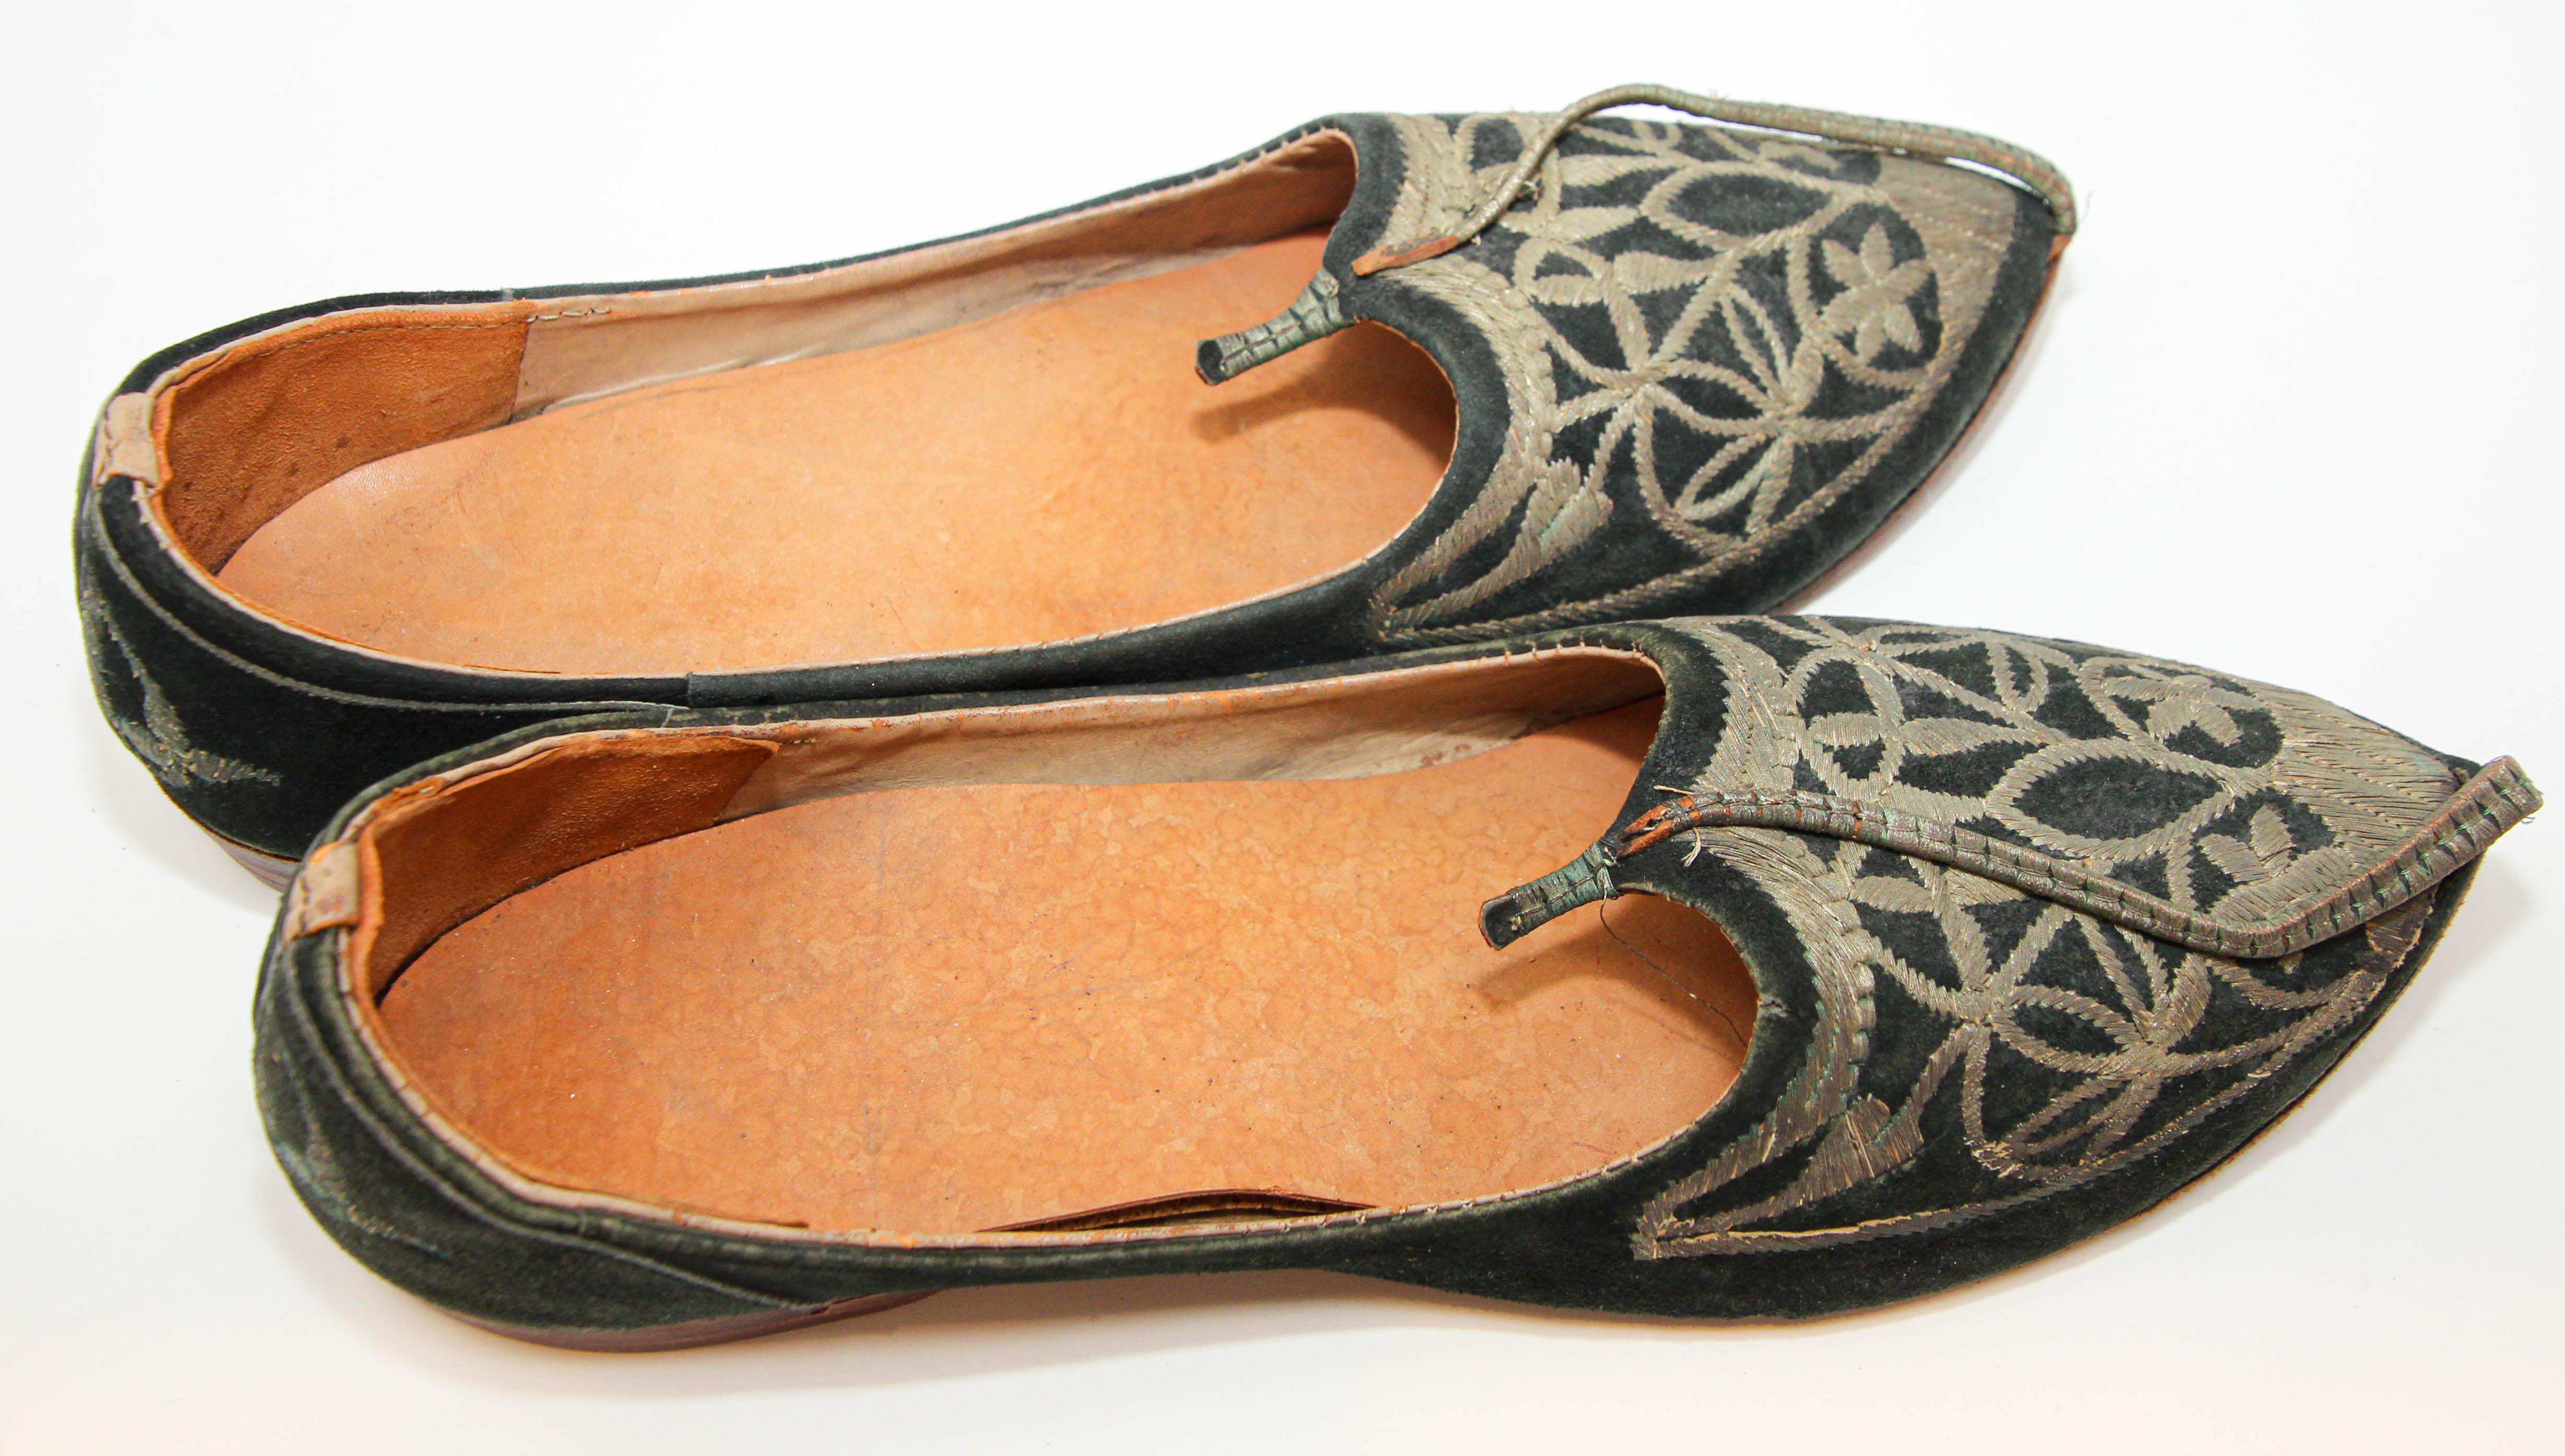 Moorish Mughal style Curled Toe Black Leather Shoes from Tony Duquette Estate For Sale 4